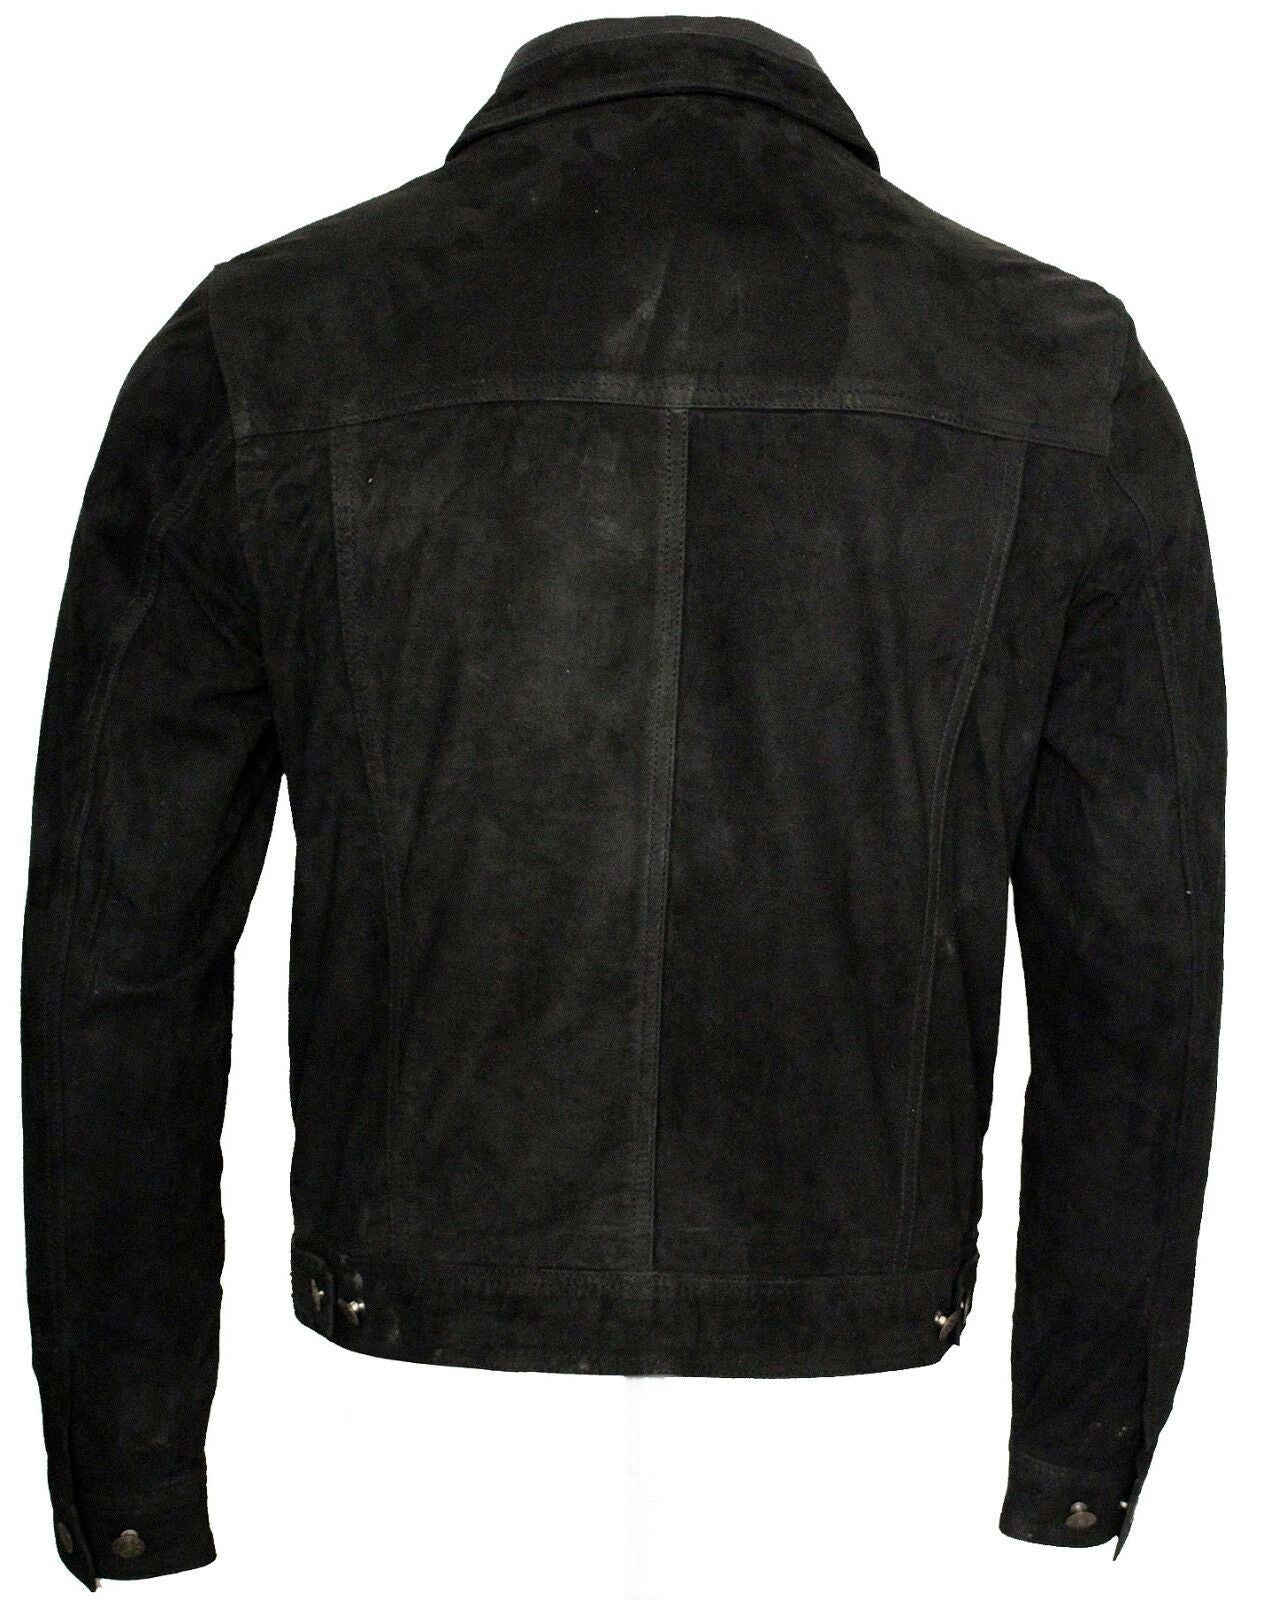 Mens Suede Leather Trucker Jacket-Dartmouth